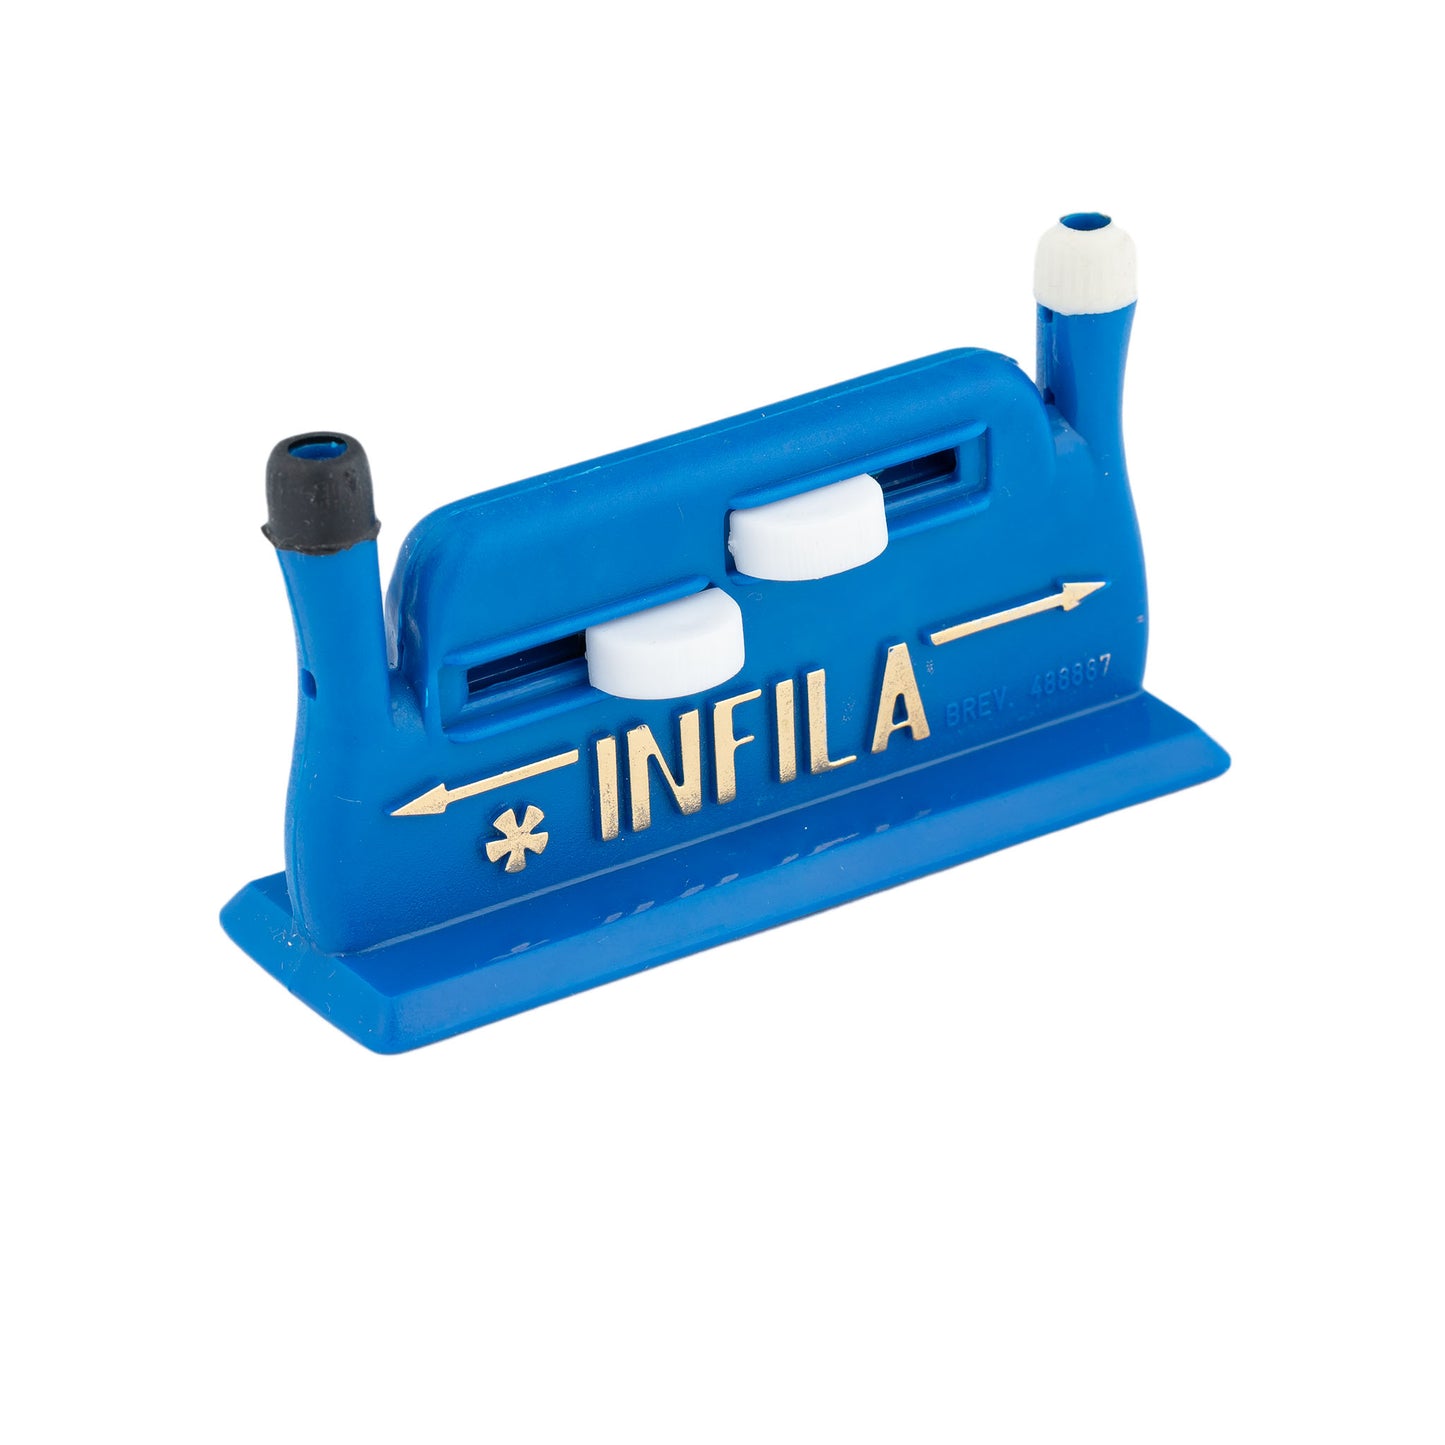 INFILA Automatic HAND SEWING Needle Threader